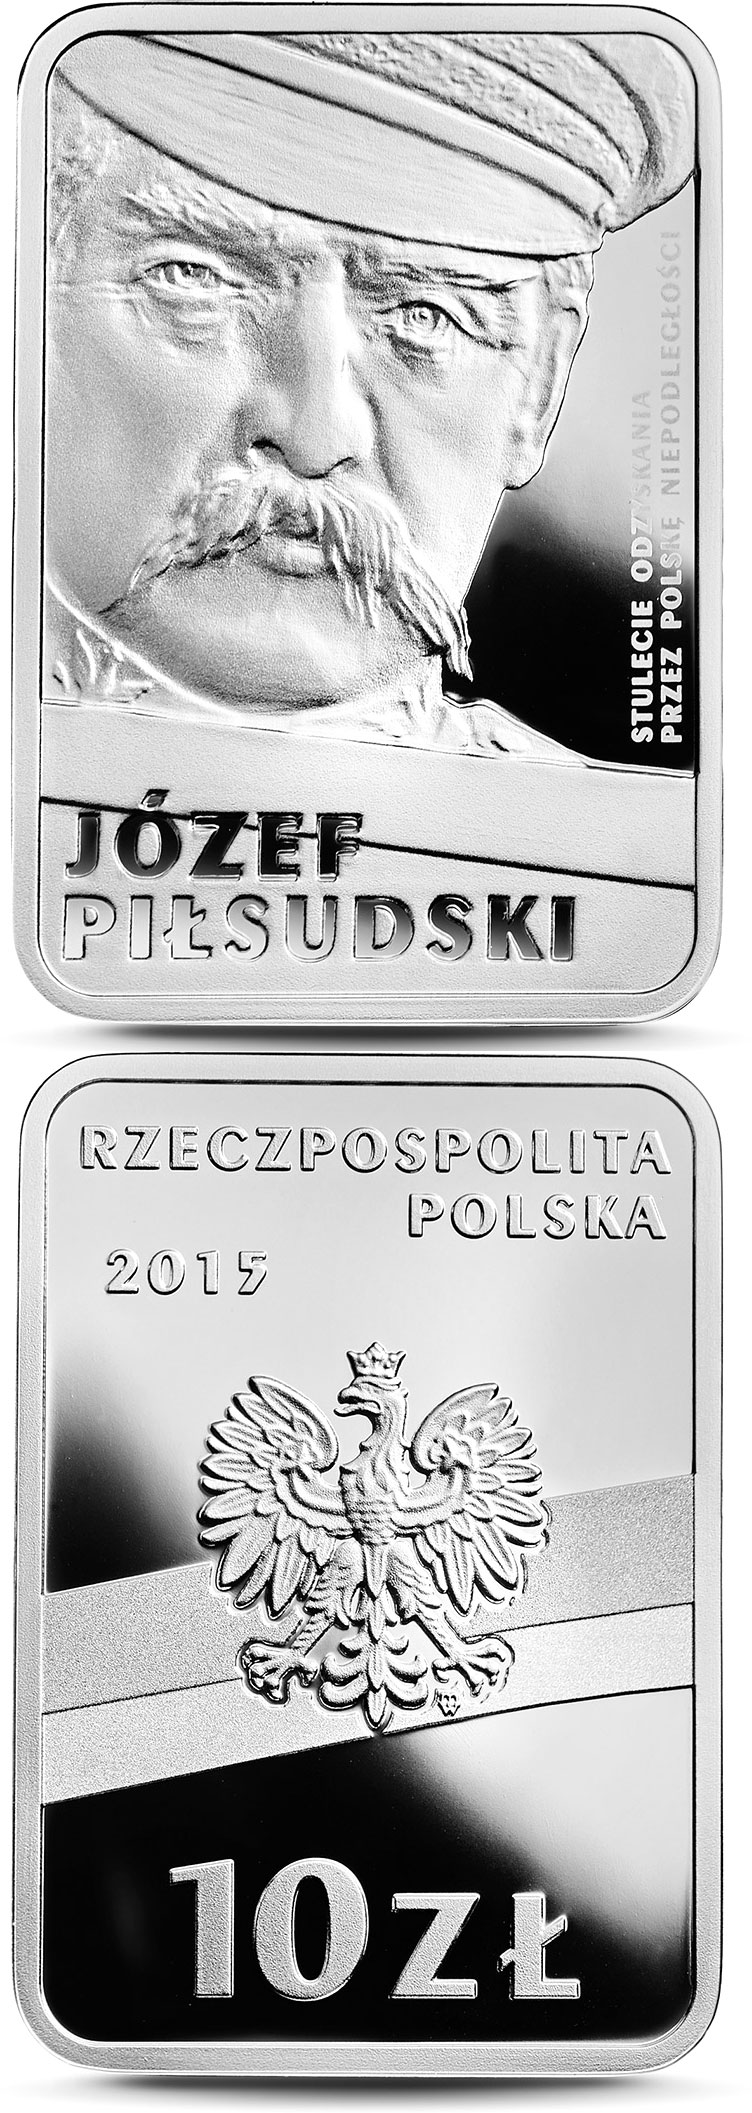 Image of 10 zloty coin - 100th Anniversary of Regaining Independence by Poland – Józef Piłsudski | Poland 2015.  The Silver coin is of Proof quality.